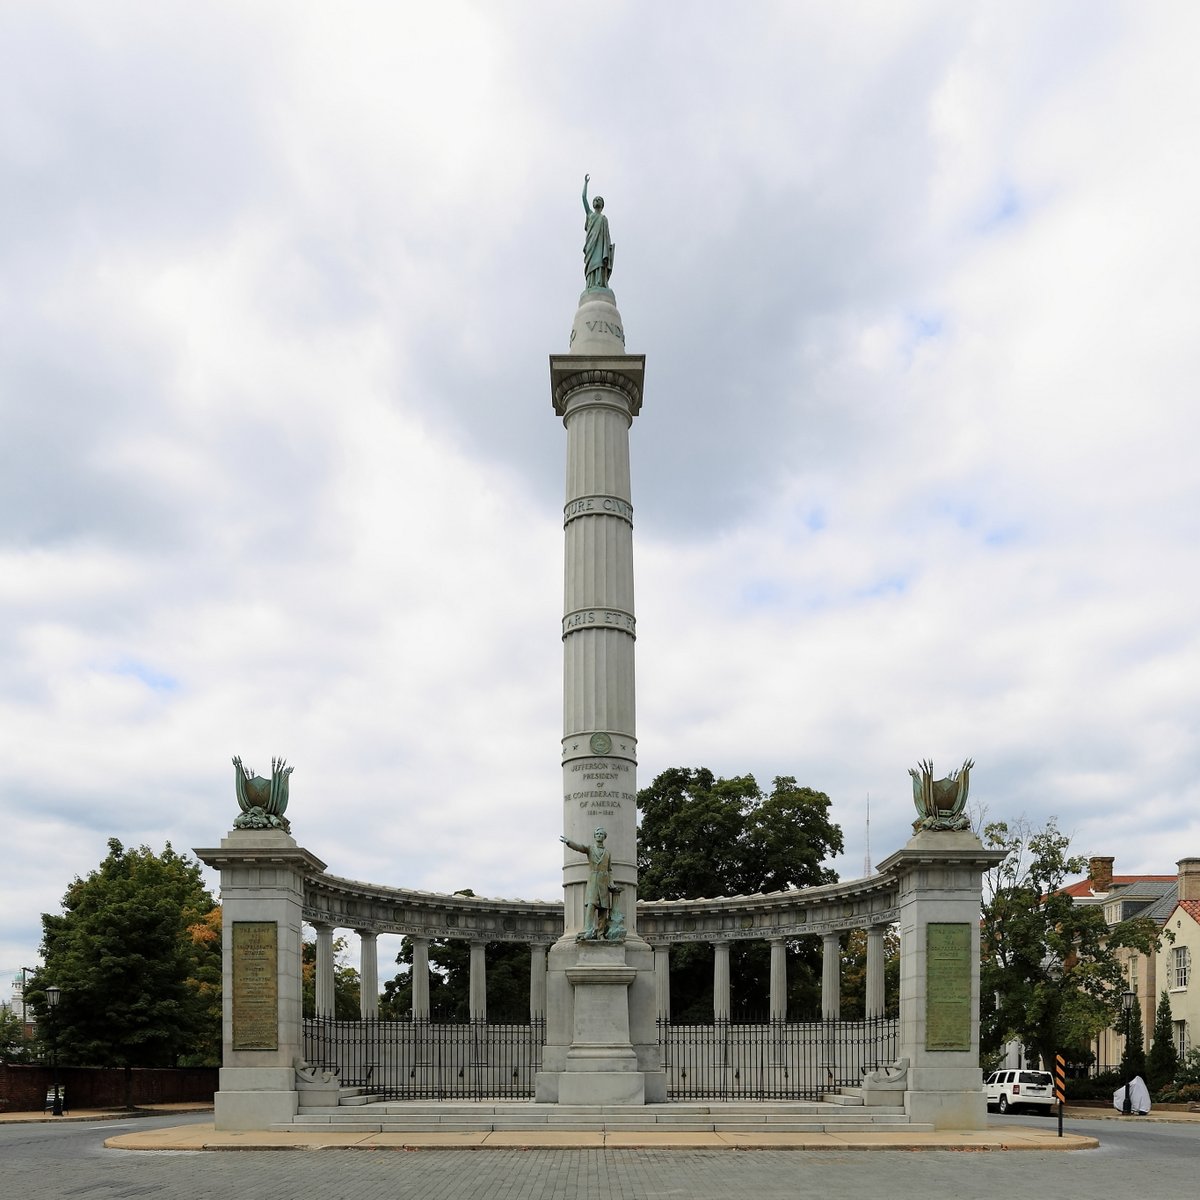 Next we come to the memorial to the "Confederate States of America," which until recently had a statue of Confederate "president" Jefferson Davis in the middle. This statue always made my father angriest; "This particular traitor wasn't even born in Virginia," he'd fume.